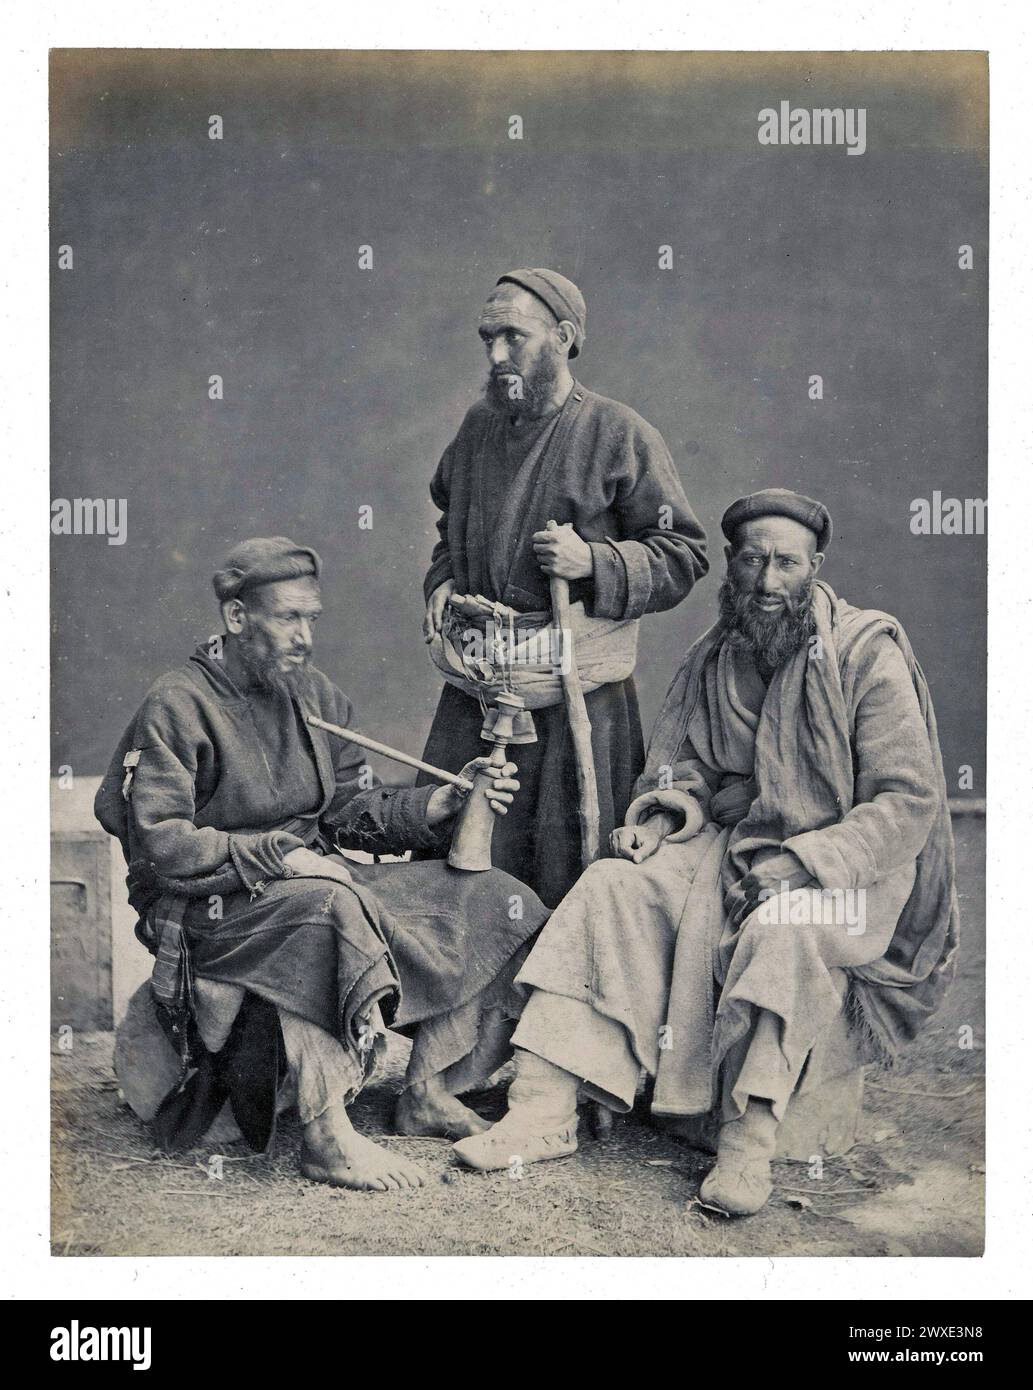 Antique photograph. Group portrait of three Balti men in Srinagar, Jammu & Kashmir, India. Original title: 'Group from Ladock' Likely photographed by Frank Mason Good. Published by Francis Frith & Co. 1869 - 1875 Stock Photo